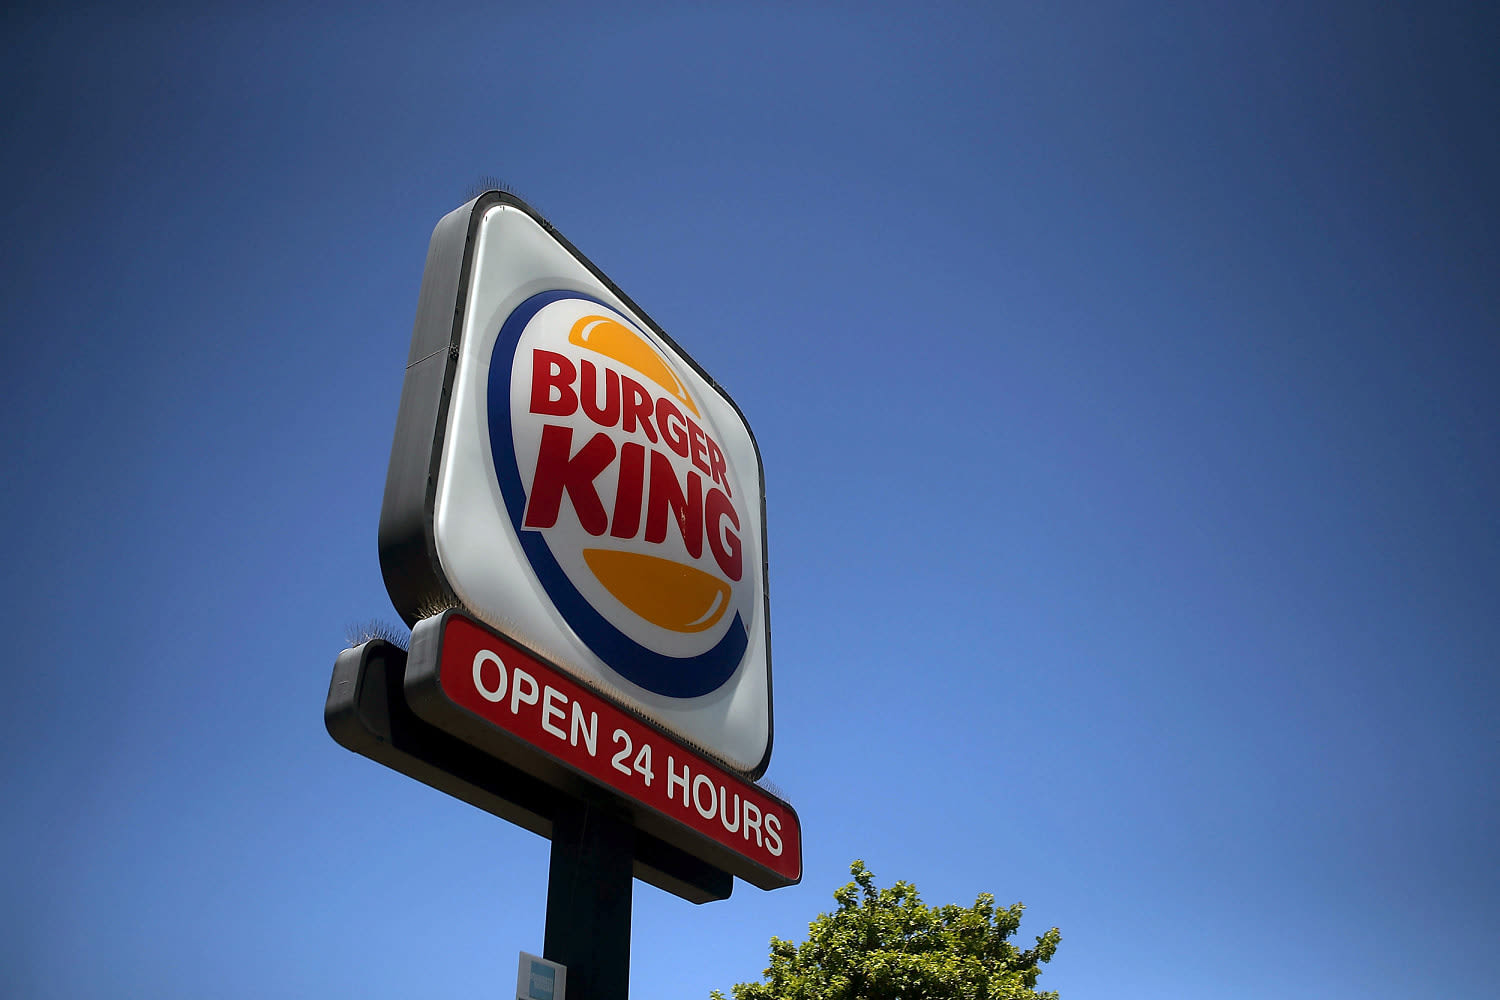 Burger King is gifting customers a week of free food to celebrate its birthday